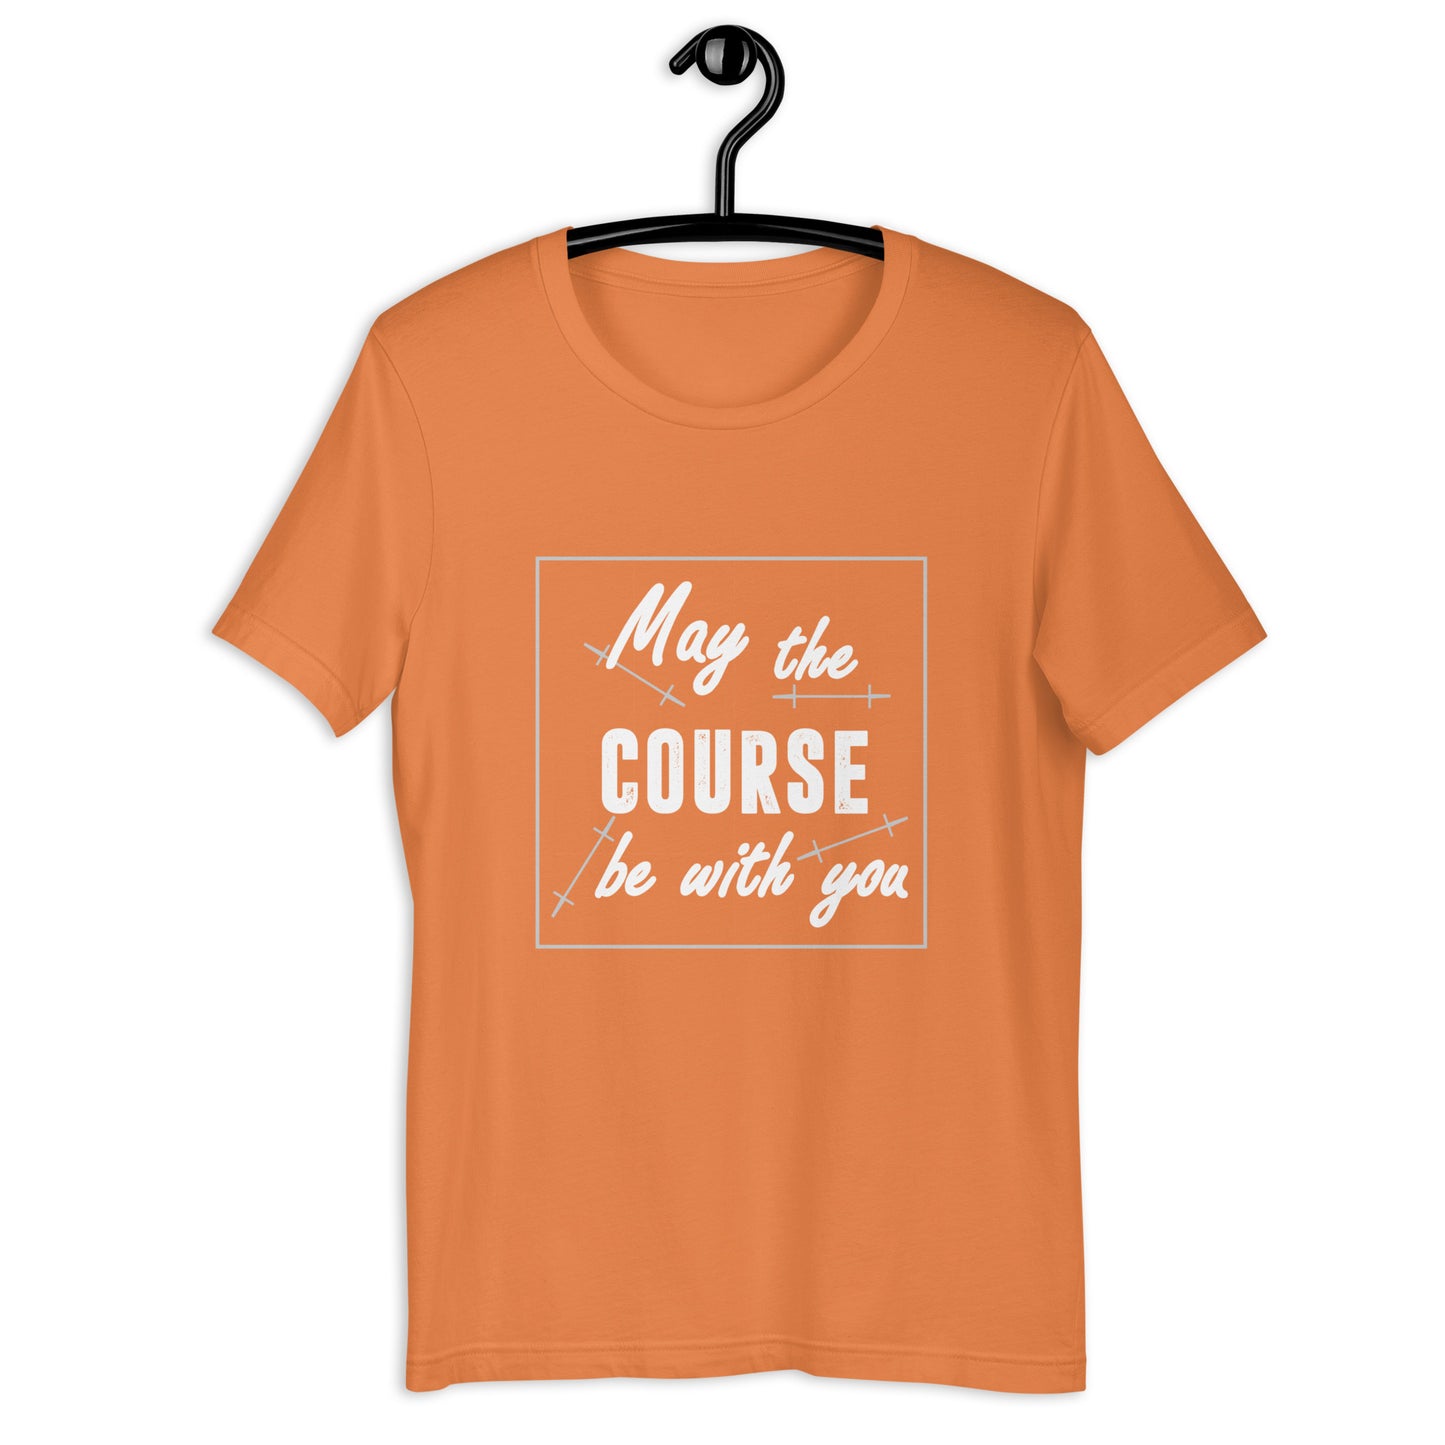 MAY THE COURSE BE WITH YOU - Unisex t-shirt